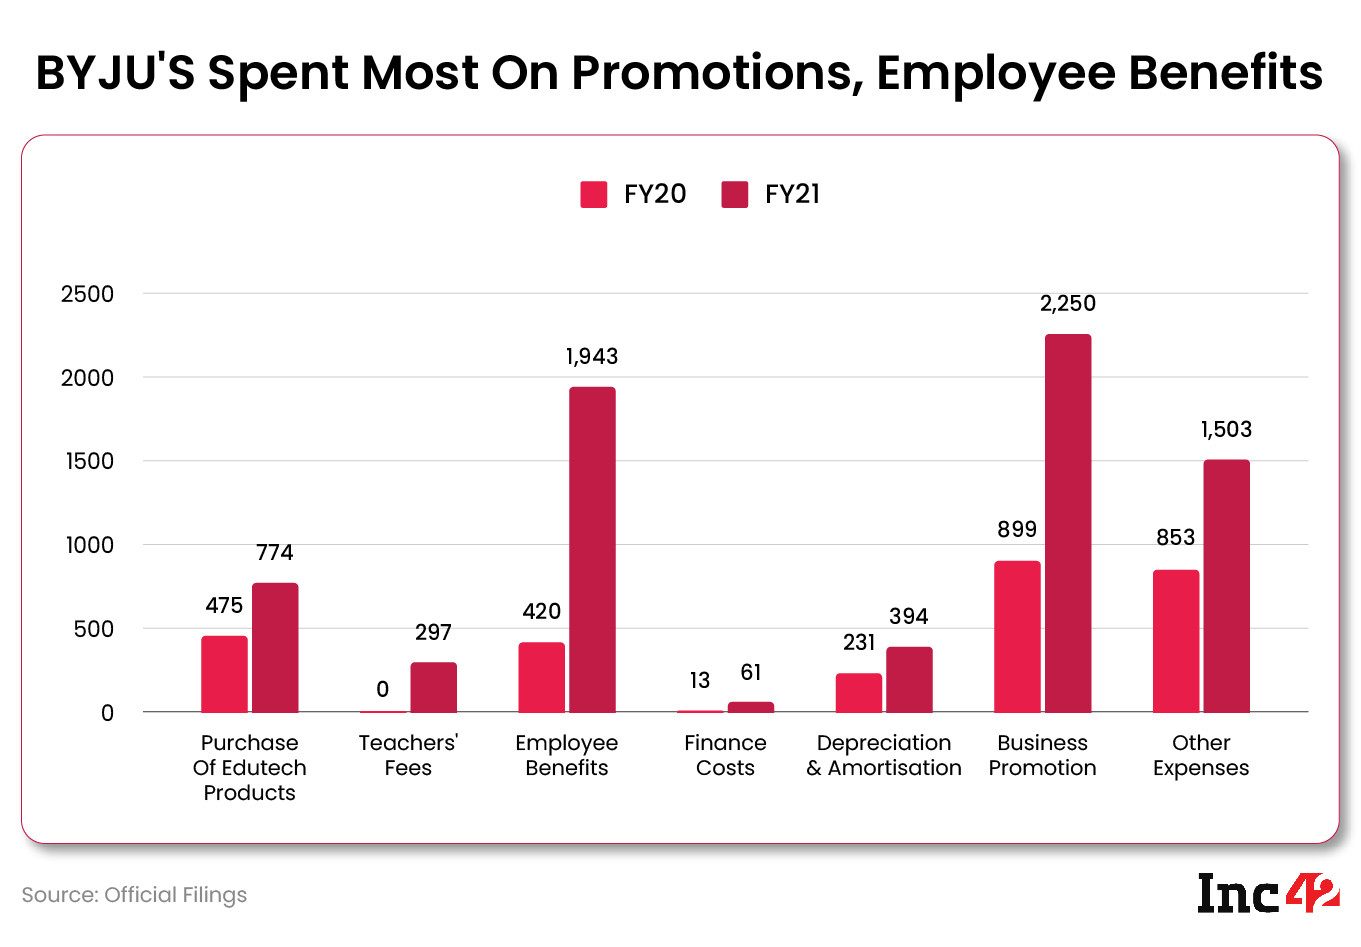 Byju's spent most on promotions, employee benefits